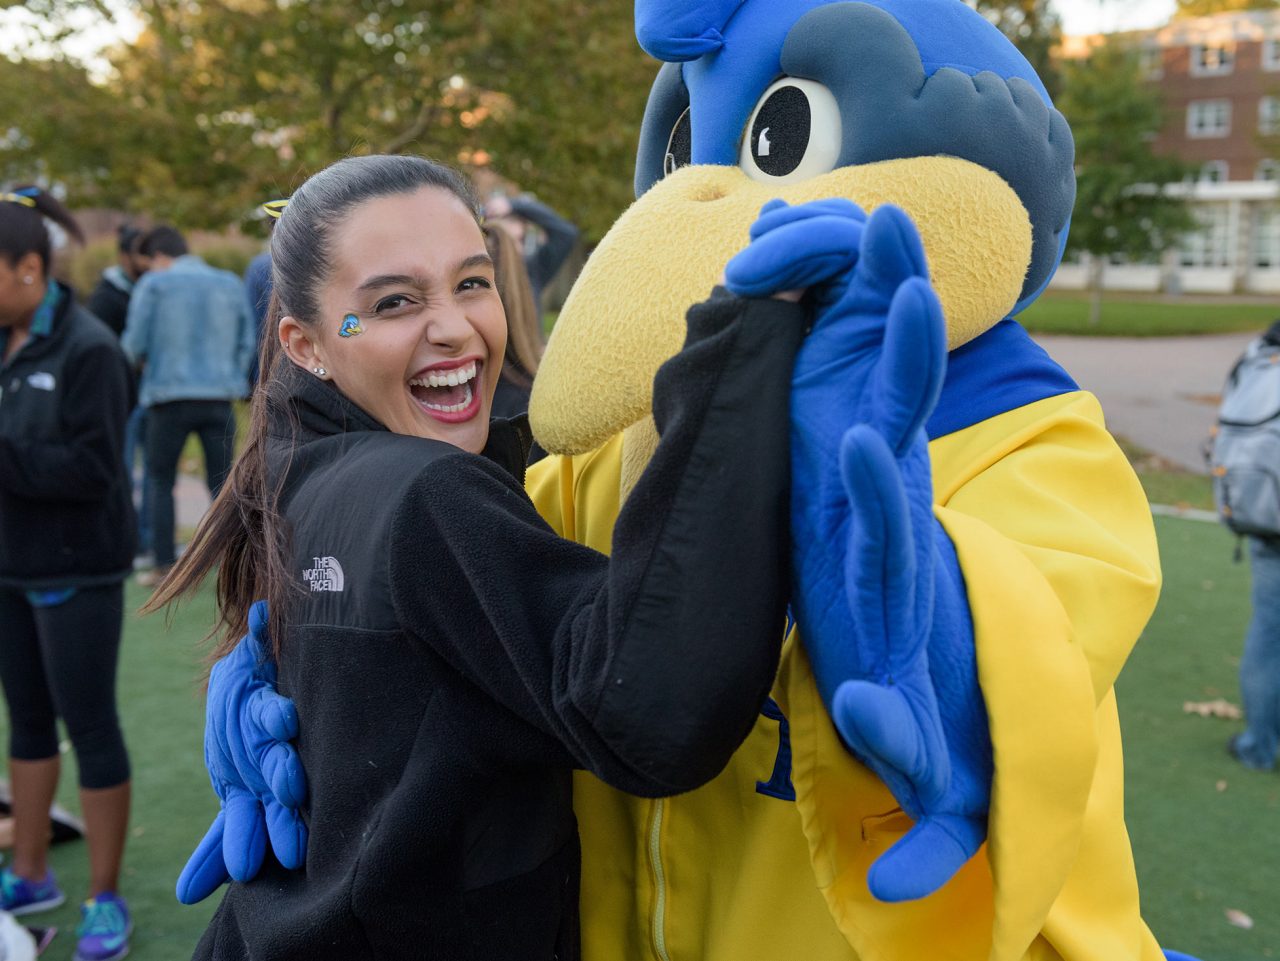 Homecoming pep rally held on the Harrington Turf the day before UD's football game against Towson University. - (Evan Krape / University of Delaware)